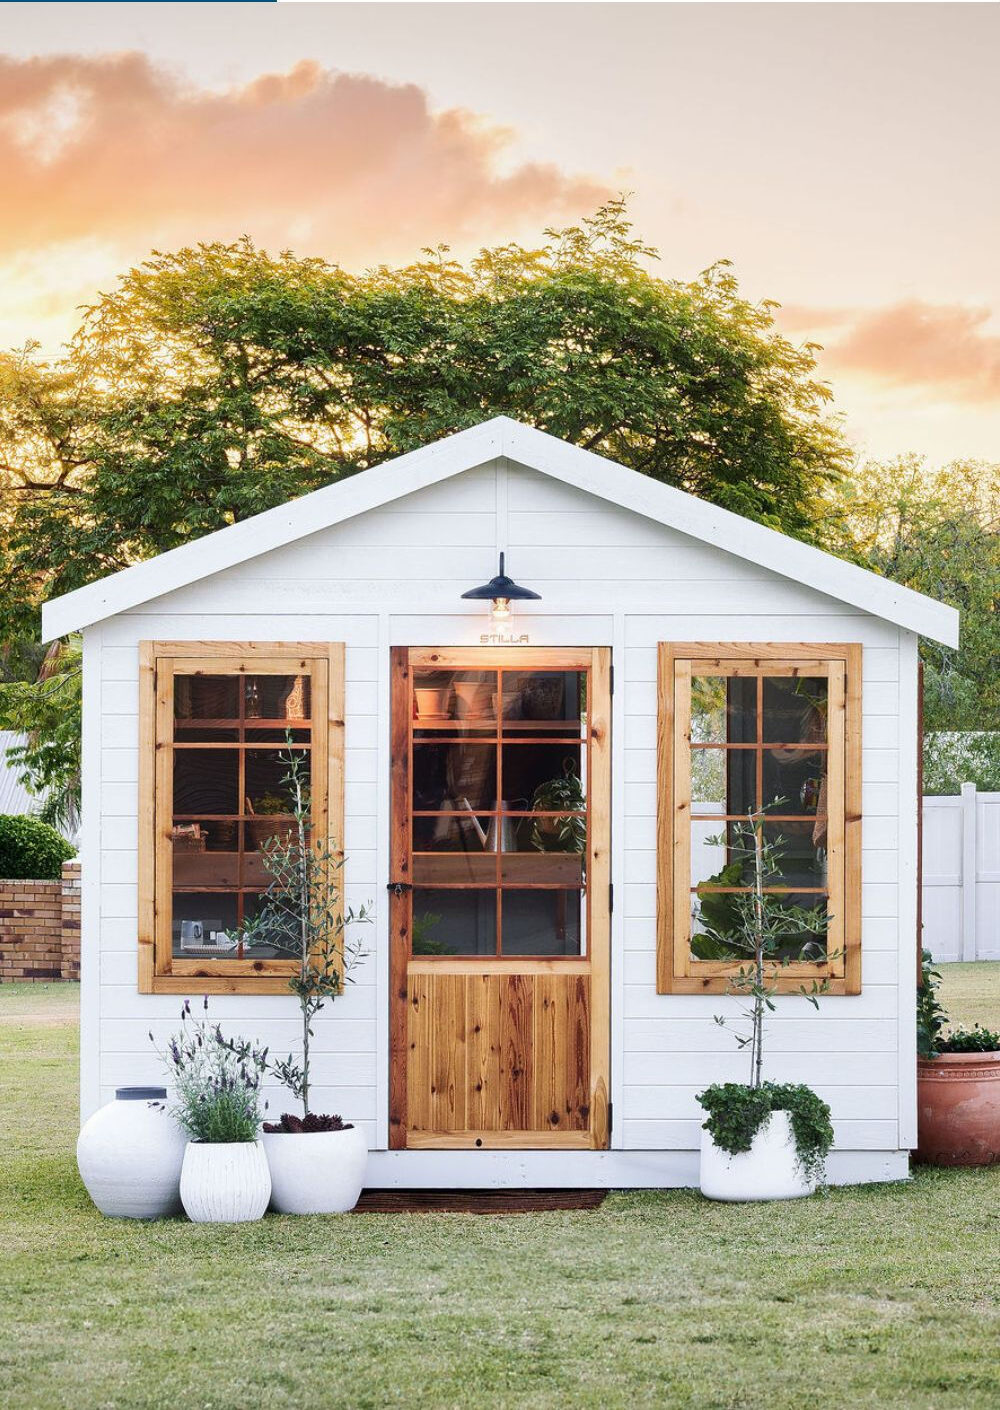 Transforming Your Outdoor Space with a Functional Backyard Shed